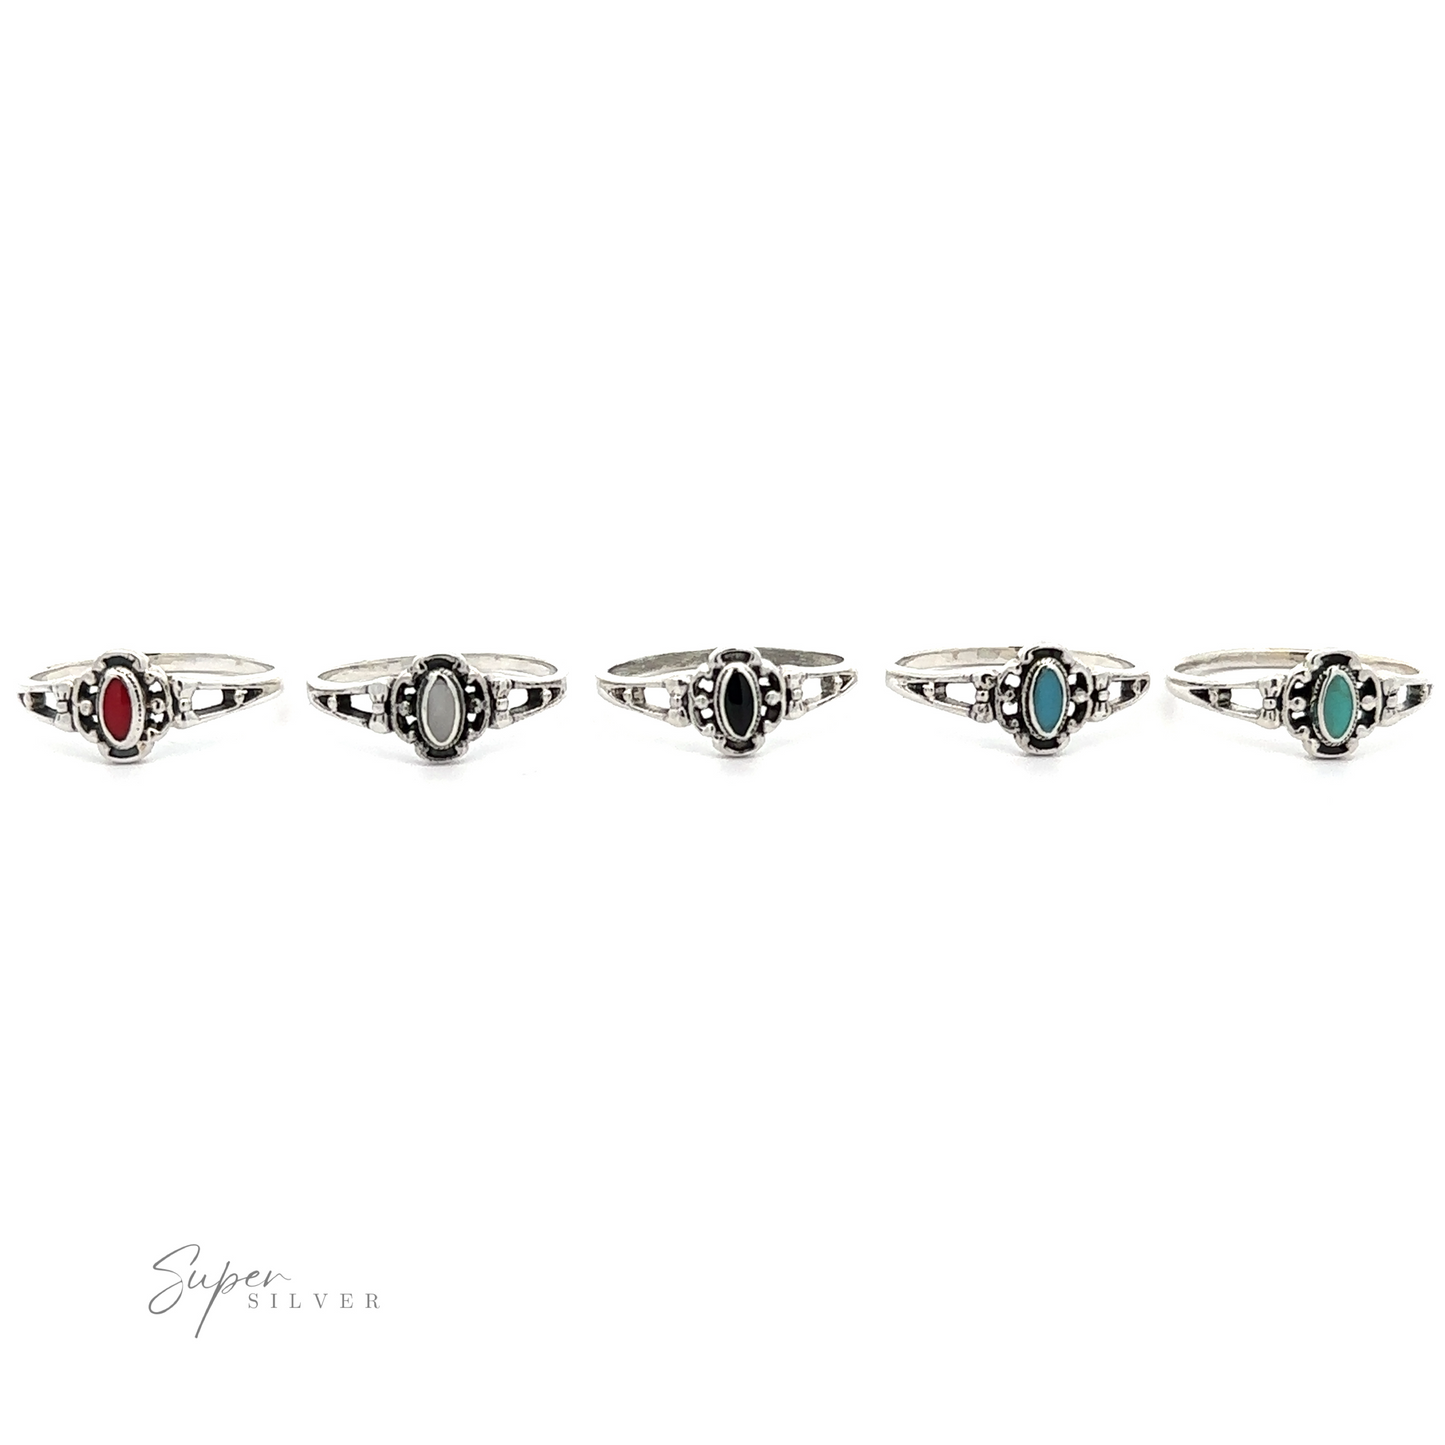 A row of Oval Inlay Stone Rings in sterling silver with stones in different colors.